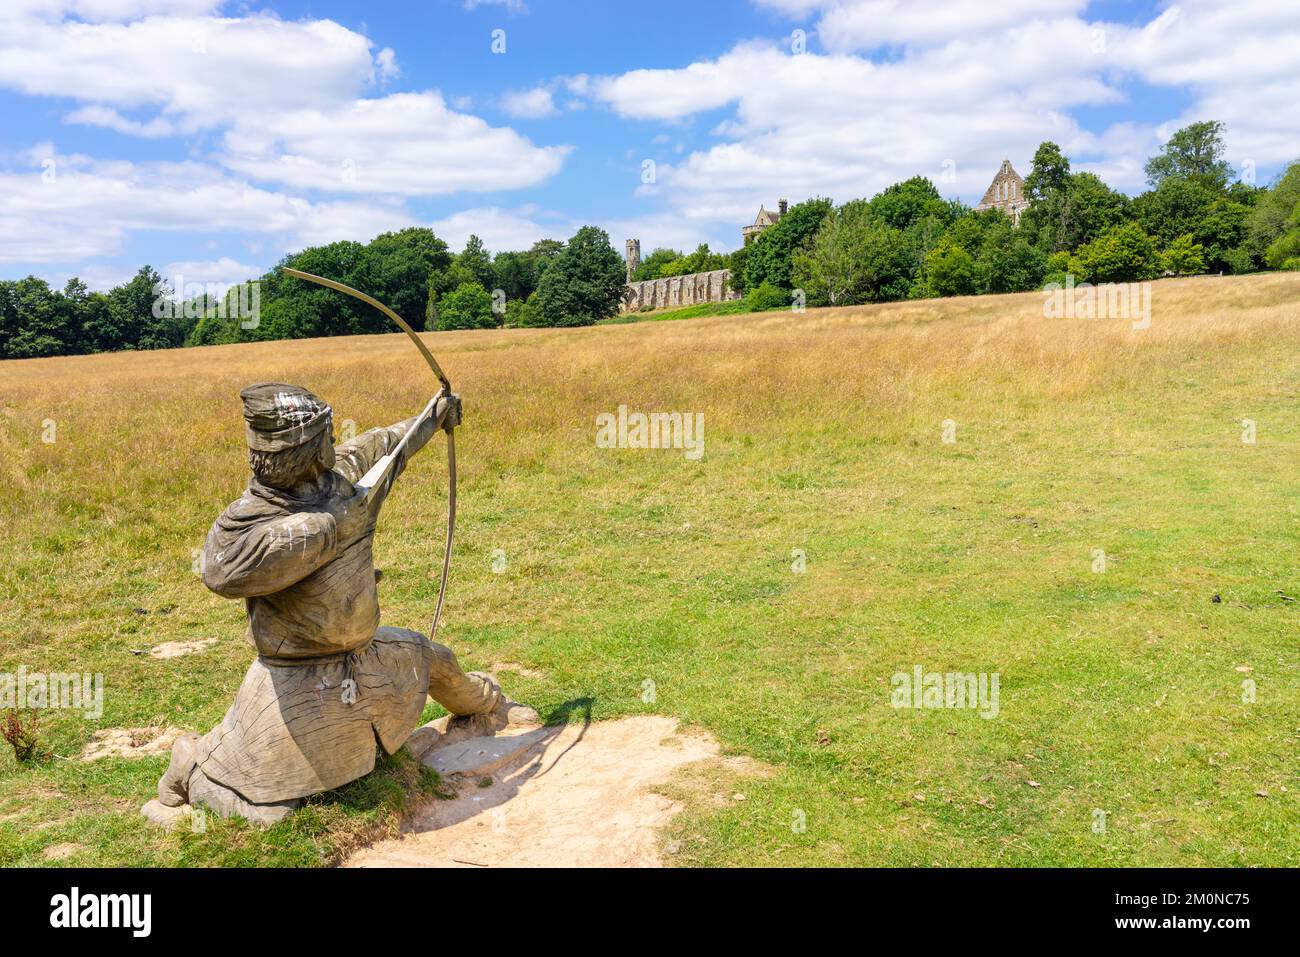 Battle Hastings East Sussex wooden statue of an archer on the battlefield trail the Battle of Hastings 1066 Battlefield Battle England UK GB Europe Stock Photo